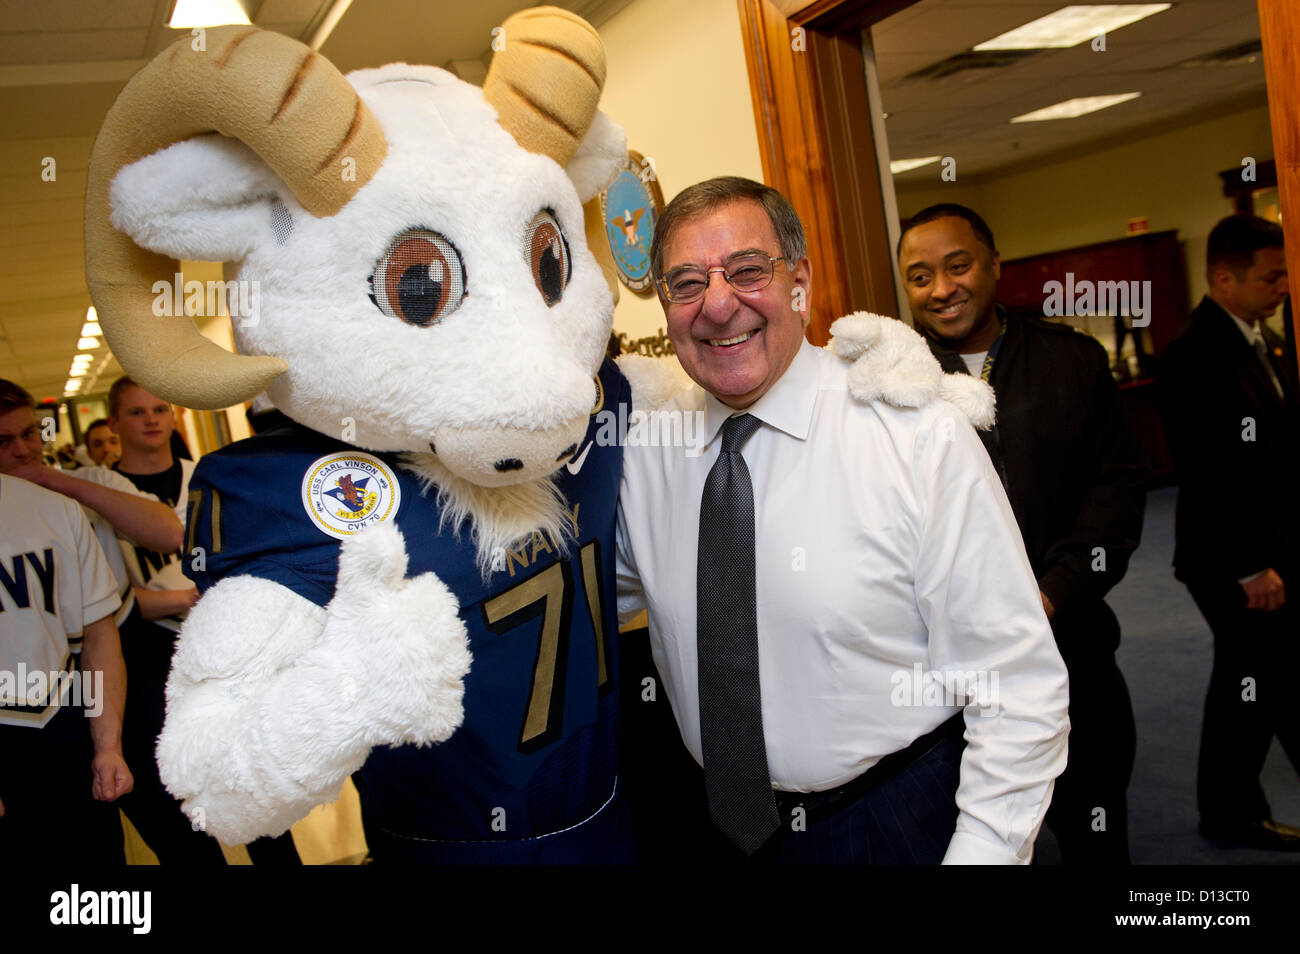 US Secretary of Defense Leon Panetta poses with Bill the Goat, the US Naval Academy Midshipmen mascot during a pep rally held in the halls of the Pentagon December 6, 2012. The 113th Army Navy football game will be held this Saturday in Philadelphia. Stock Photo